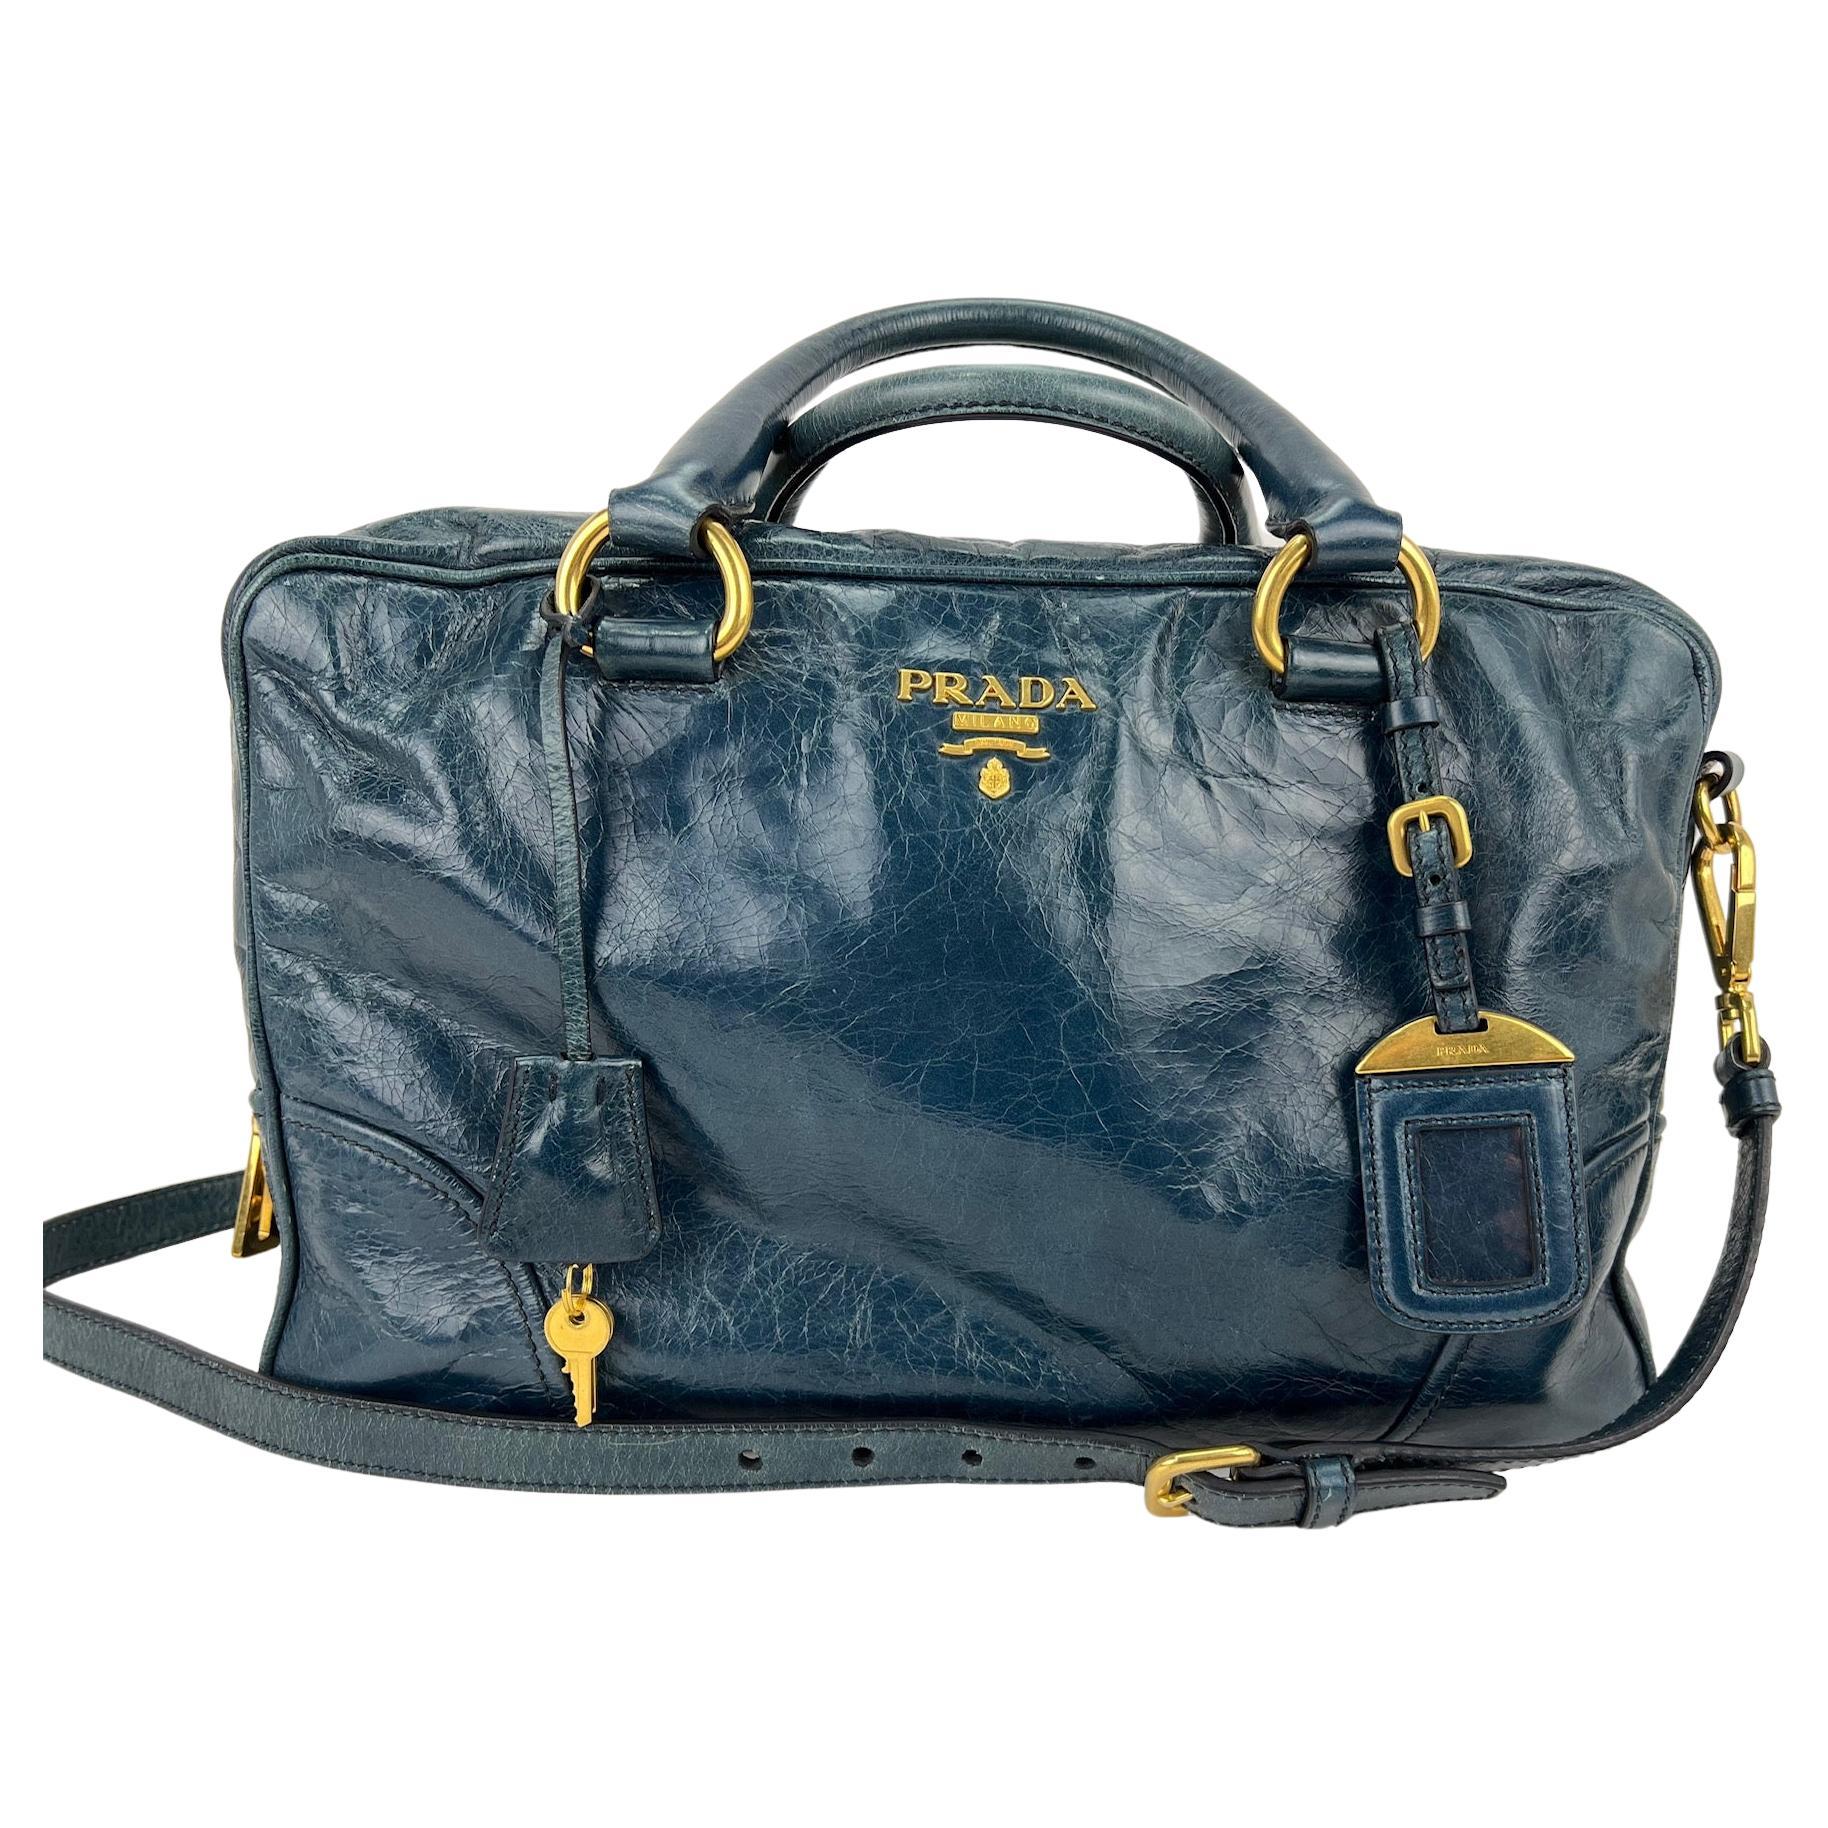 Pre-Owned  100% Authentic
PRADA Vitello Shine Shopping Satchel Denim 
W/Added Insert to help keep shape and organize
RATING: B...Very Good, well maintained, 
shows minor signs of wear
MATERIAL: distressed shiny leather 
STRAP: Prada Leather